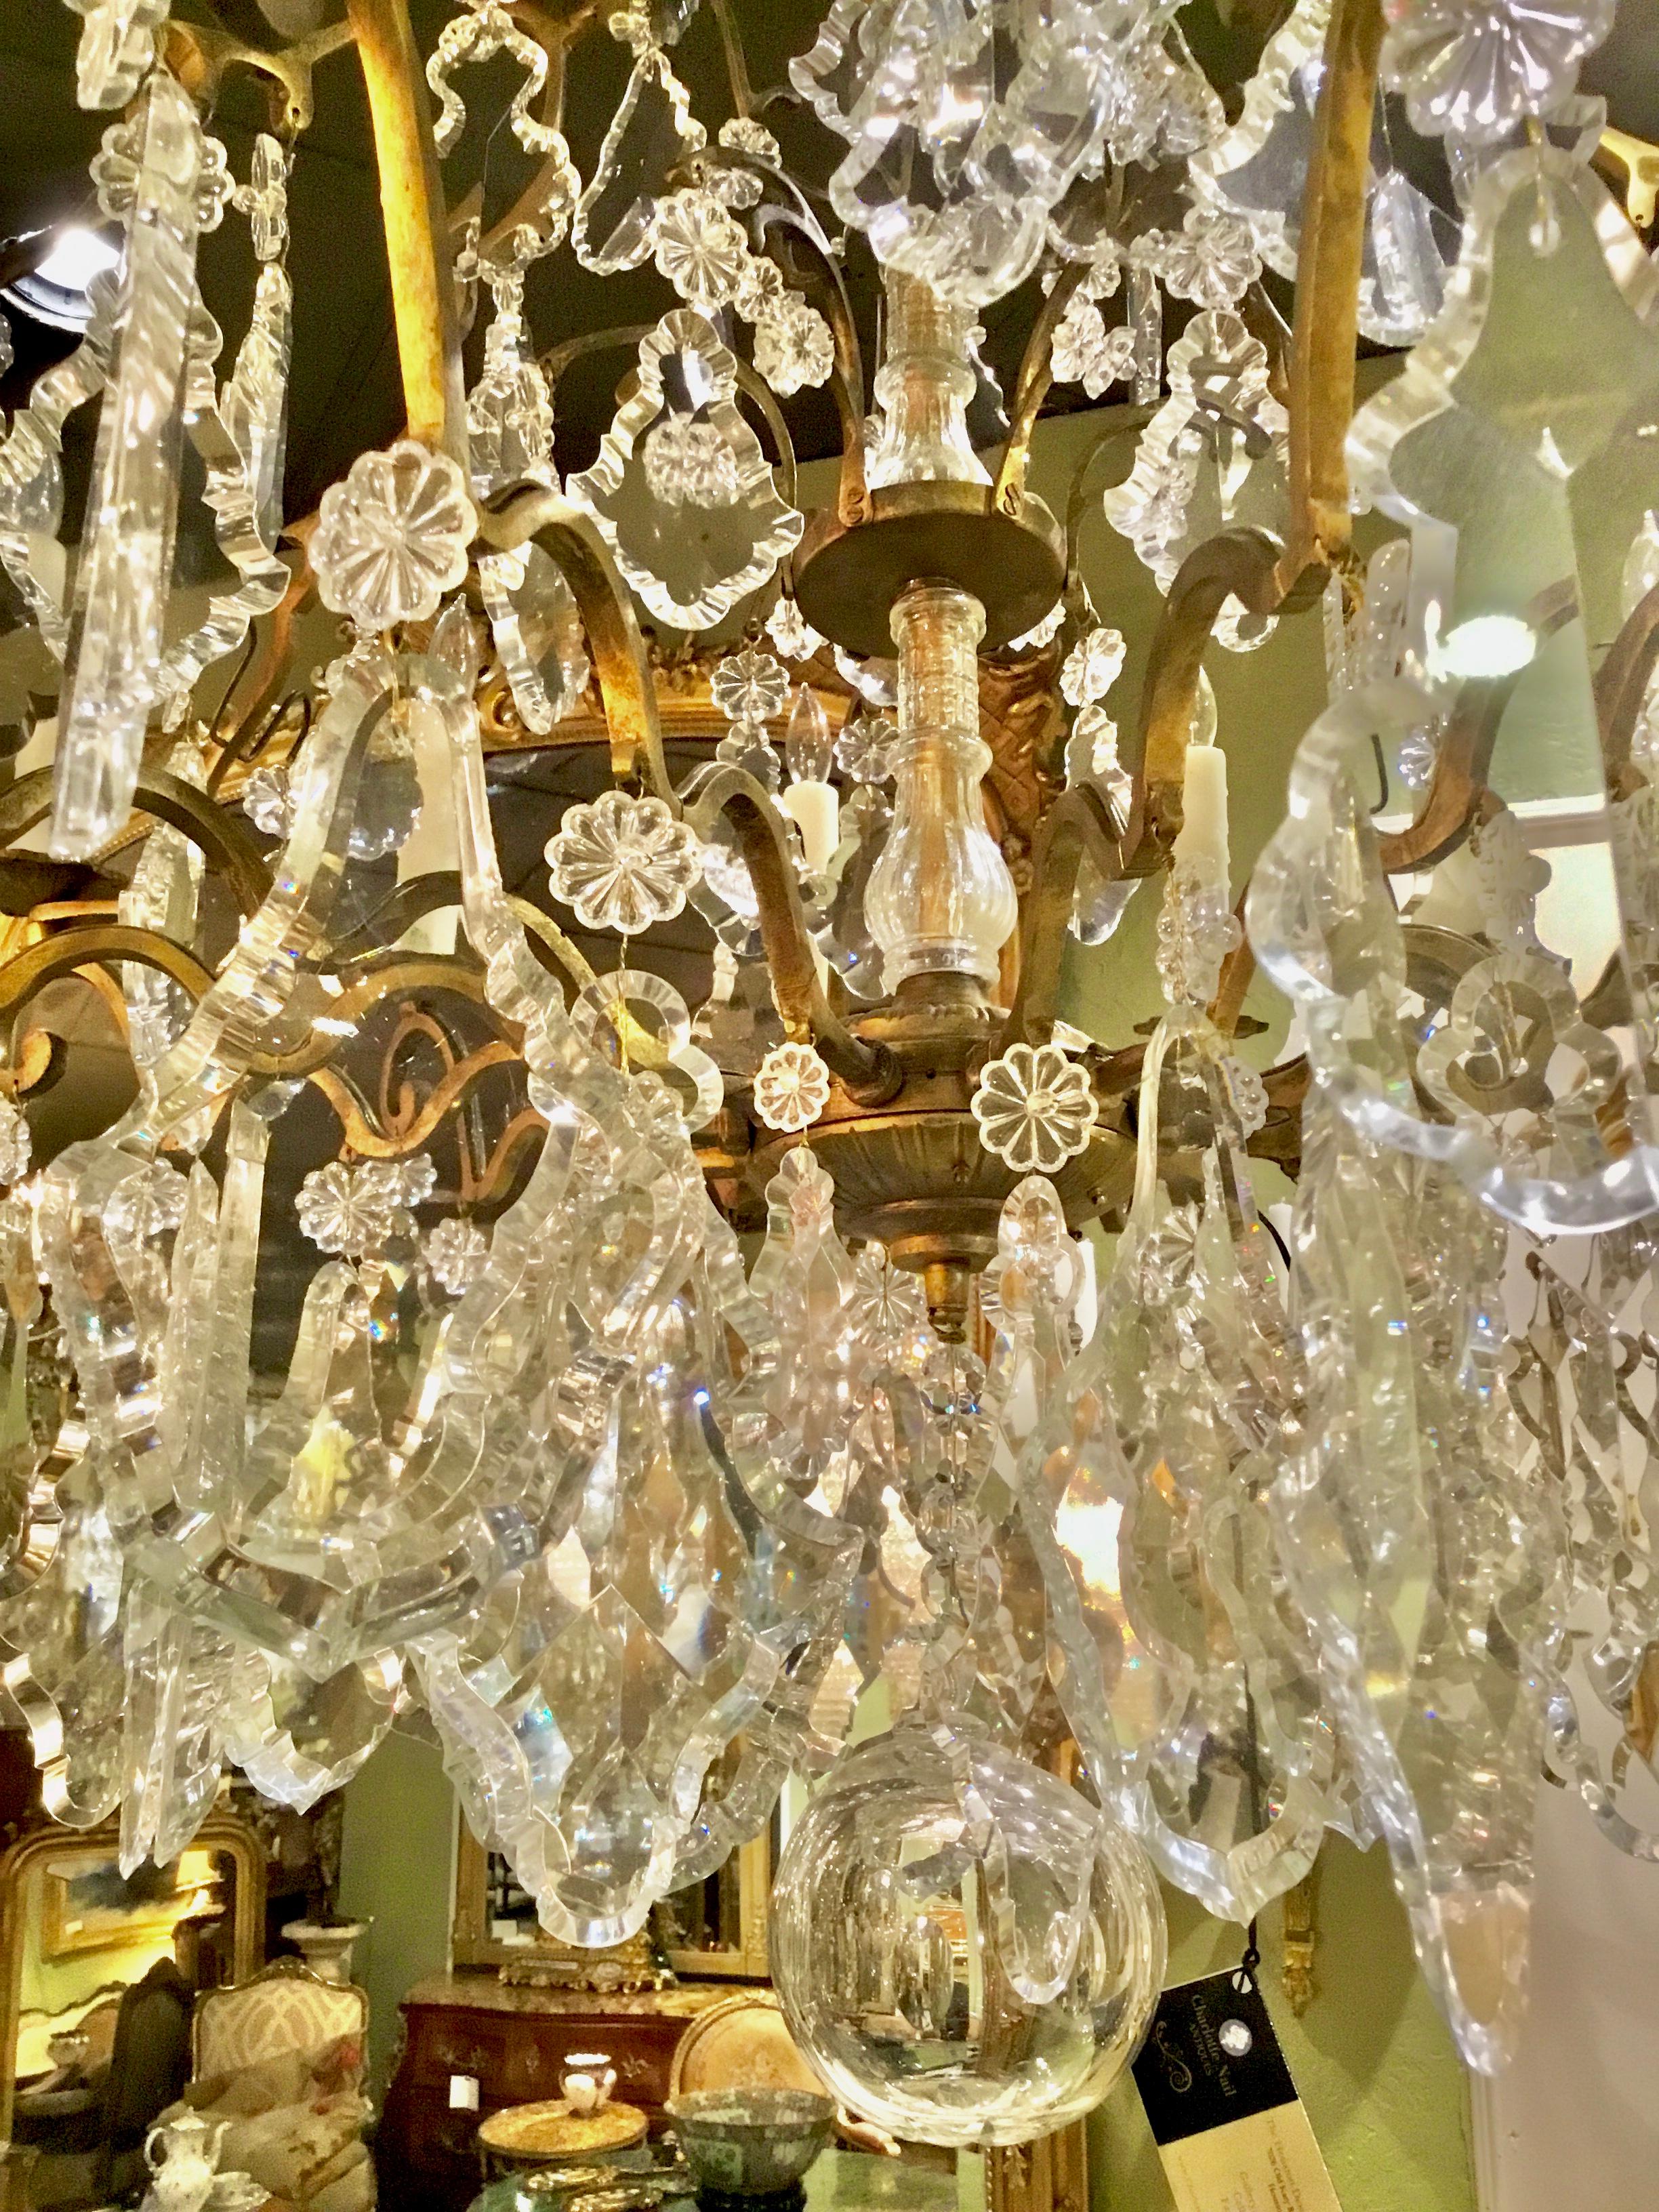 Exceptional crystal and bronze chandelier with 12-light around the perimeter with a central crystal stem.
Having scrolling arms and large crystal pendants. The tall fixture 
Has Crystal around the shaped glass central stem.
The gilt bronze has a